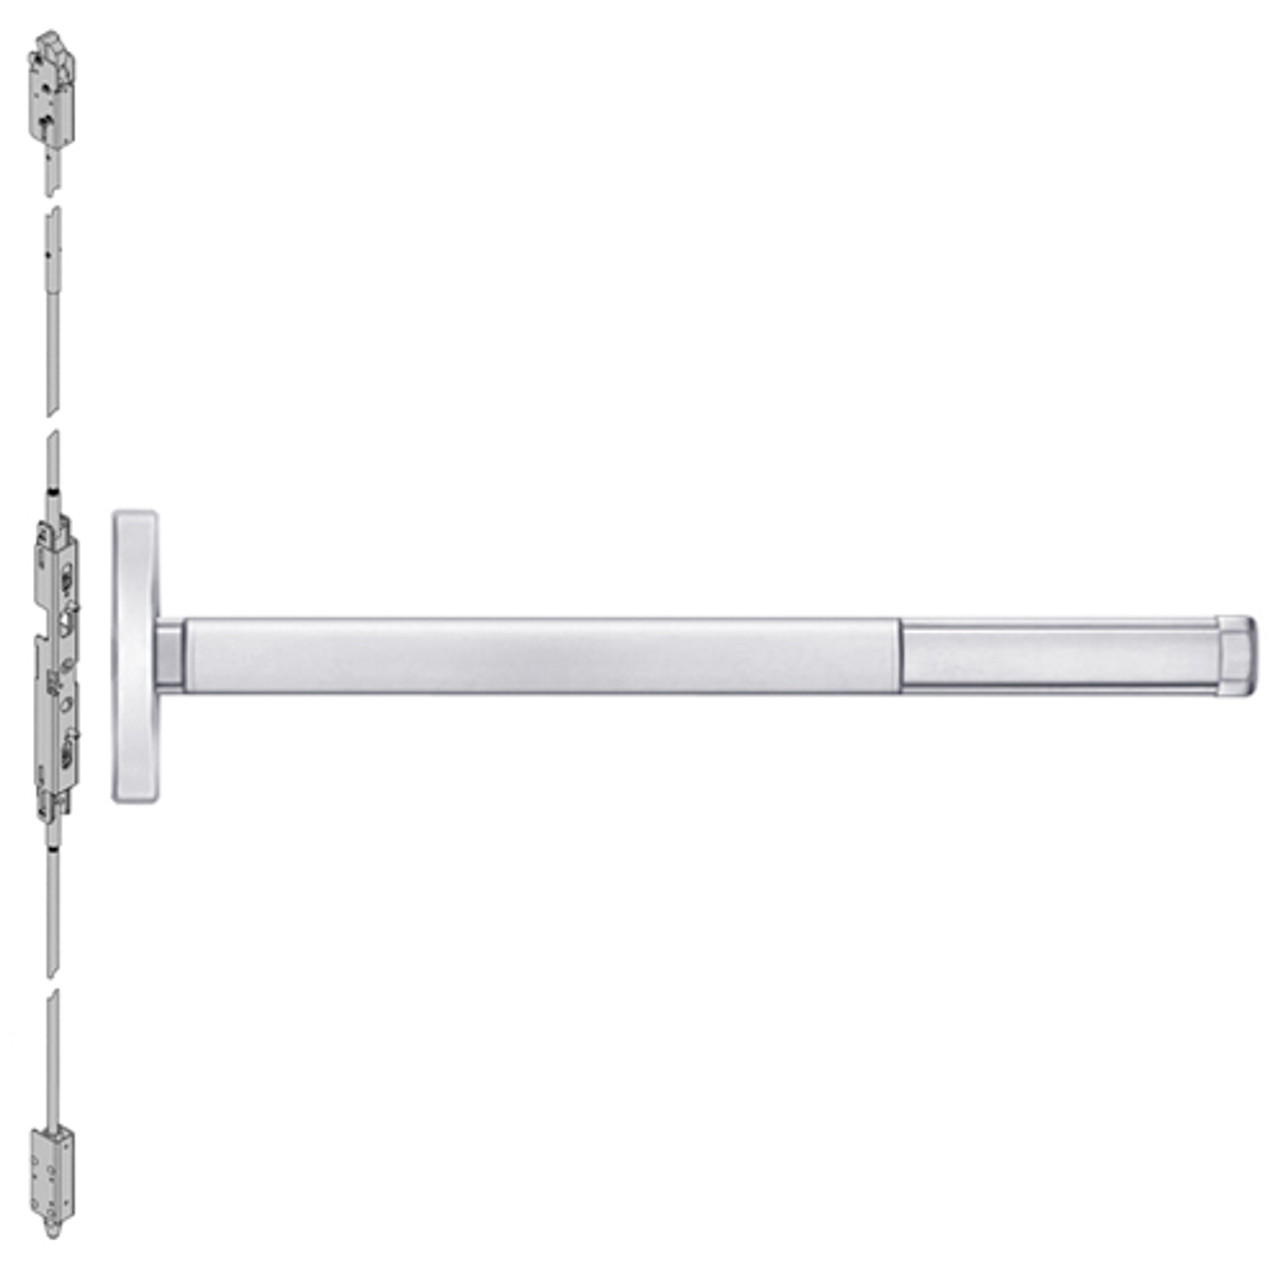 MLRFL2614-625-48 PHI 2600 Series Fire Rated Concealed Vertical Rod Exit Device with Motorized Latch Retraction Prepped for Lever Always Active in Bright Chrome Finish